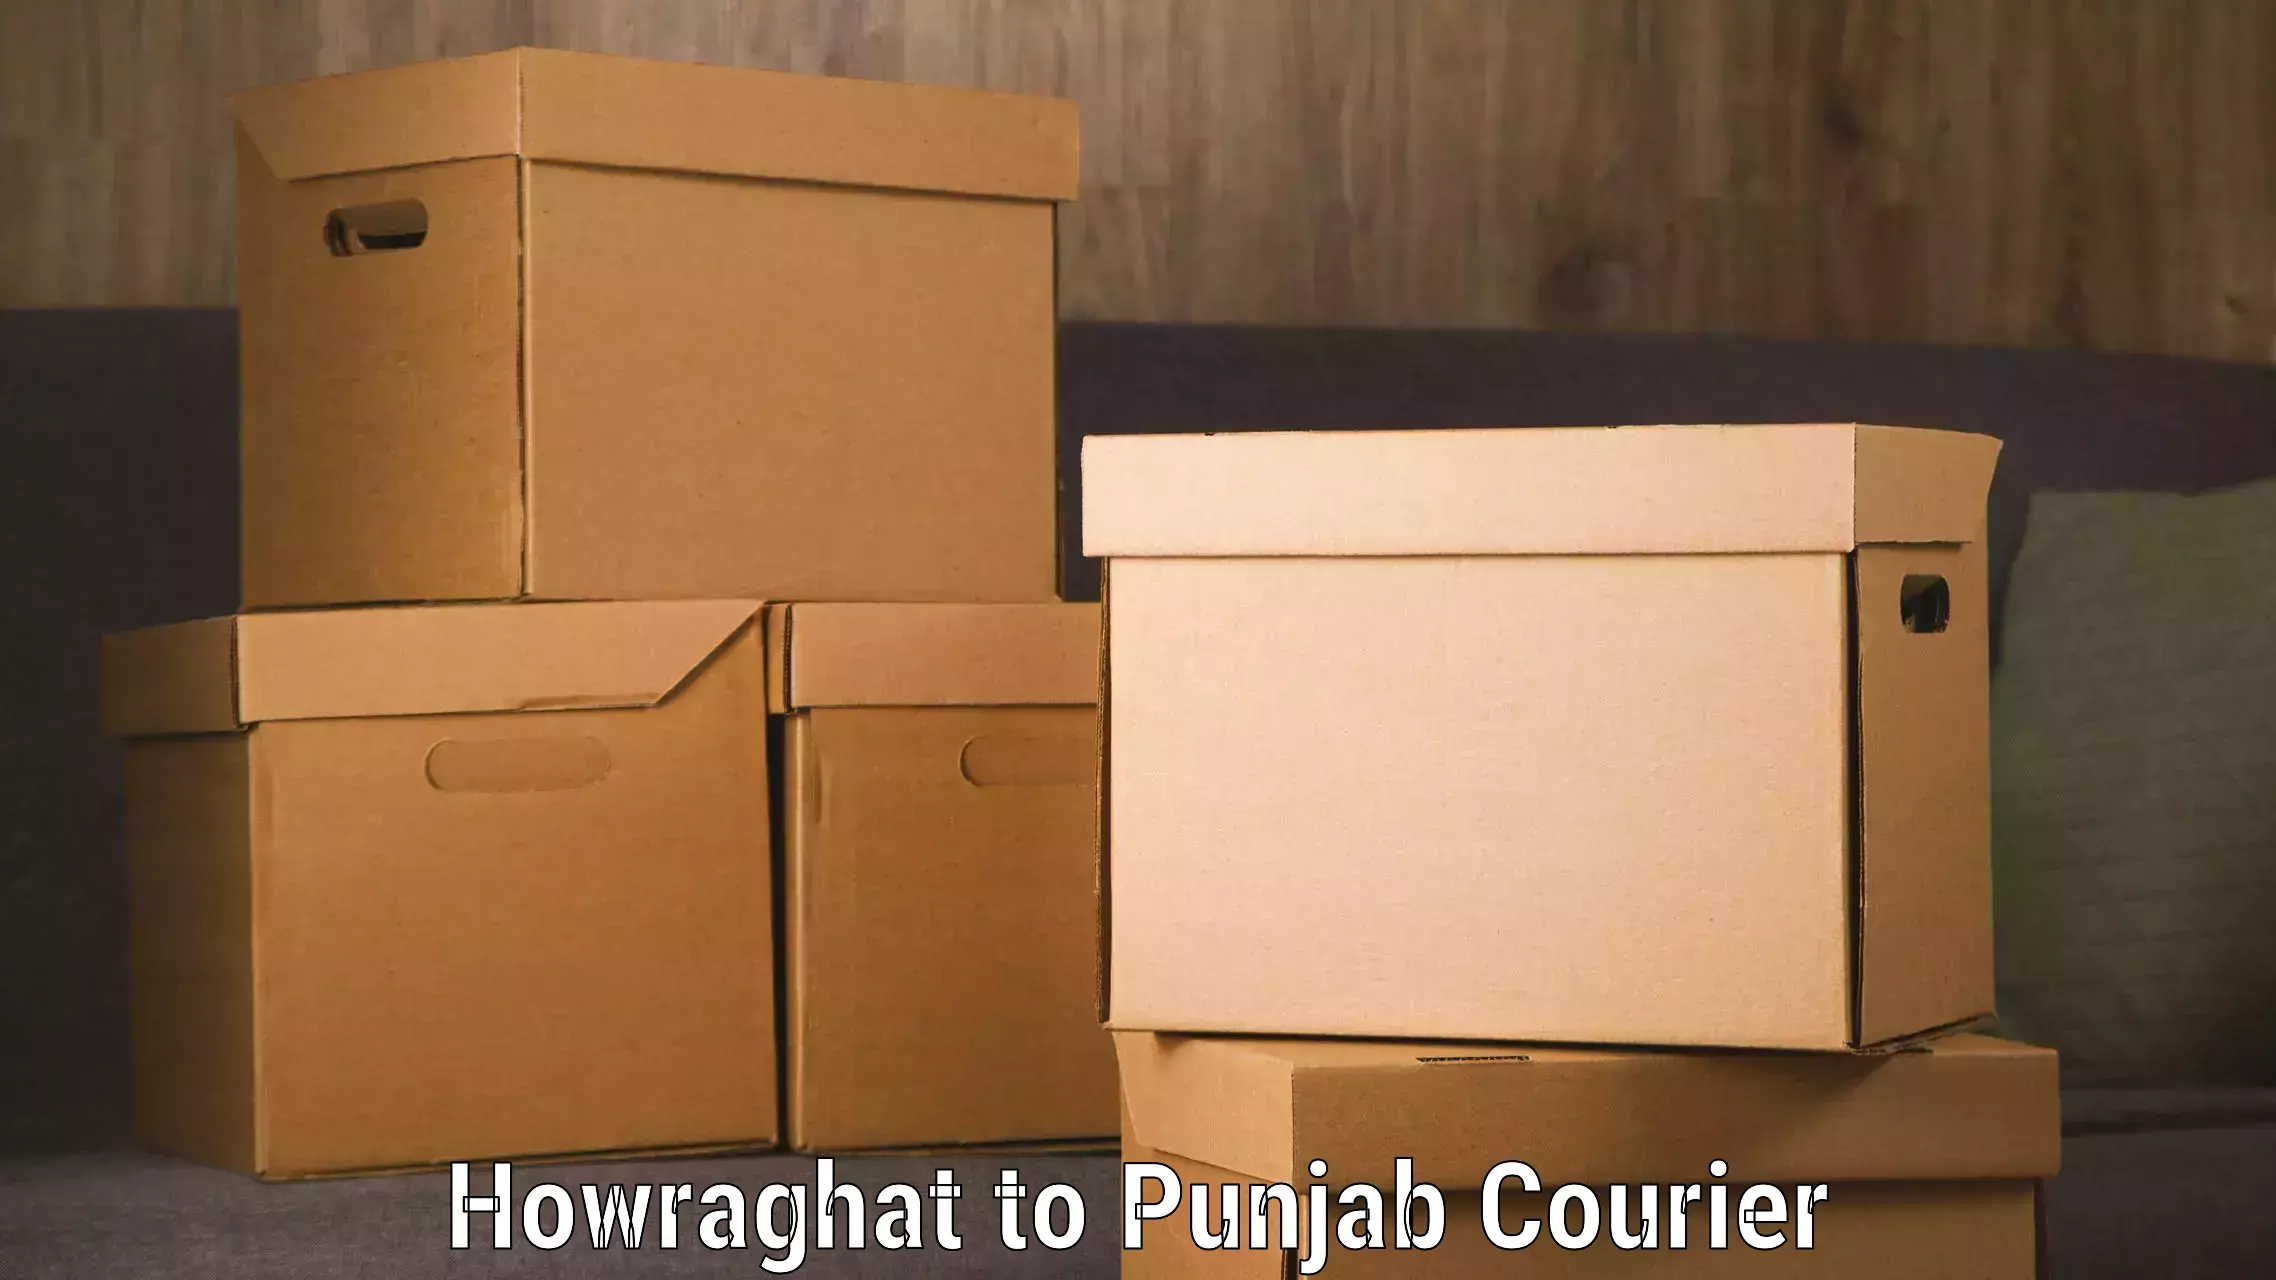 Luggage transit service Howraghat to Mohali